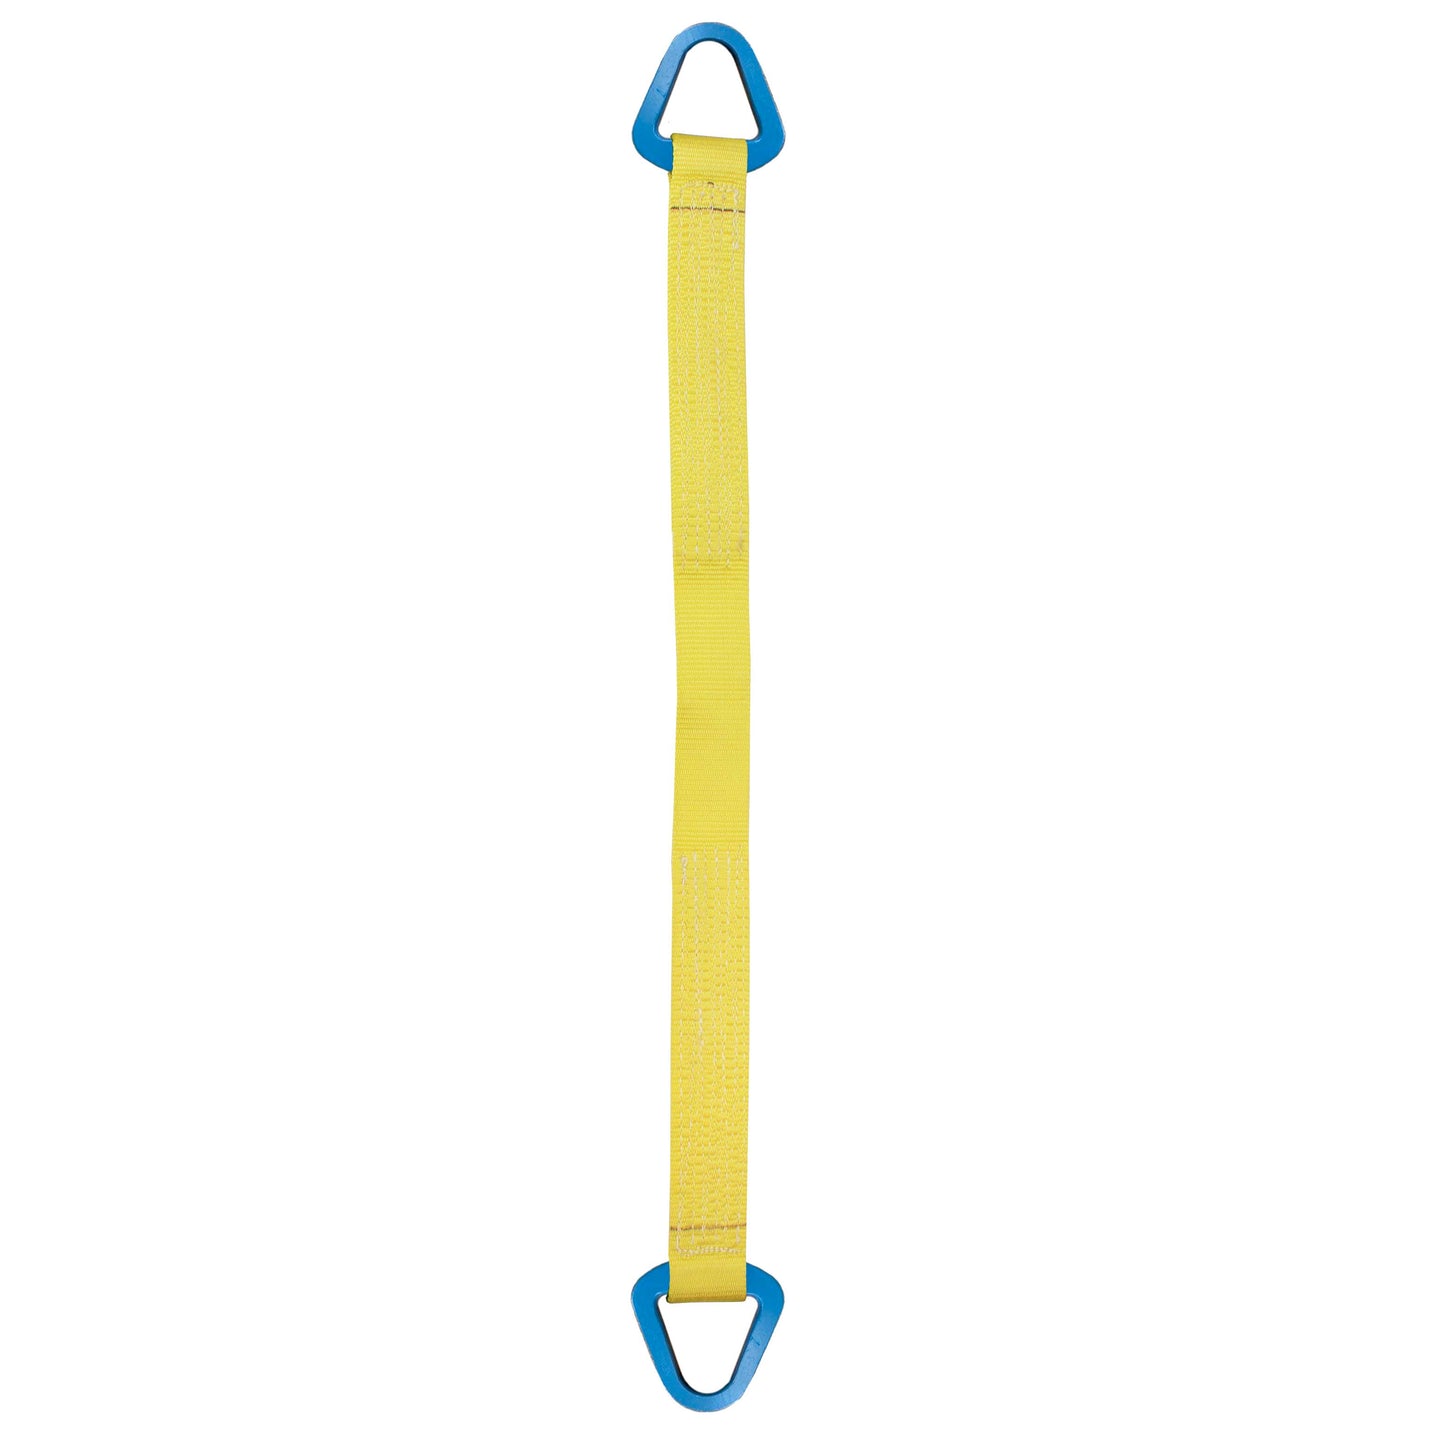 Nylon Lifting Sling Triangle 12 inch x 10 foot 1ply image 1 of 2